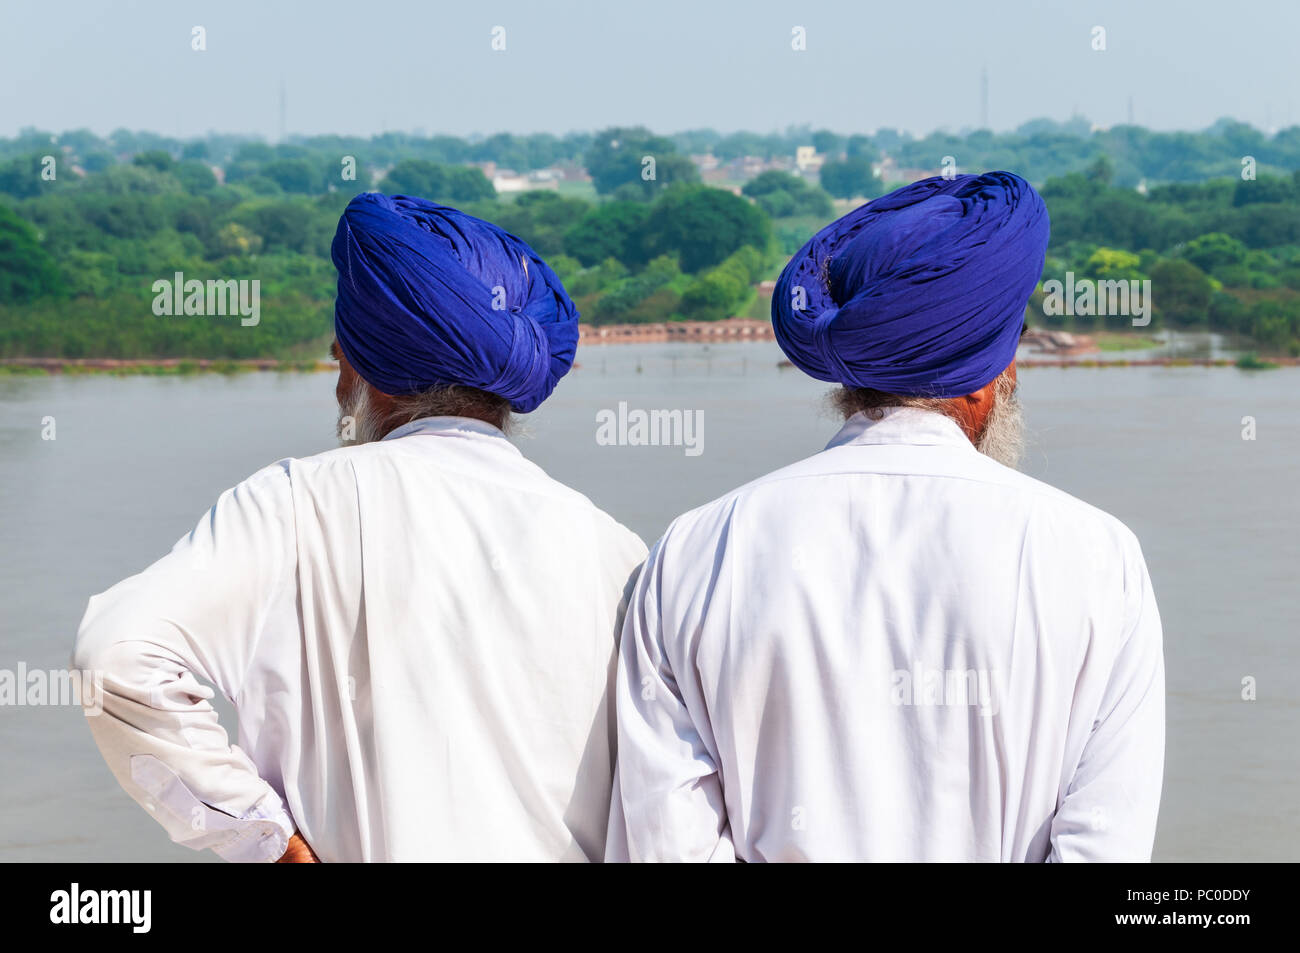 View from behind of two Indian Sikh men wearing identical blue turbans and looking in opposite directions away from the Taj Mahal in Agra, India Stock Photo